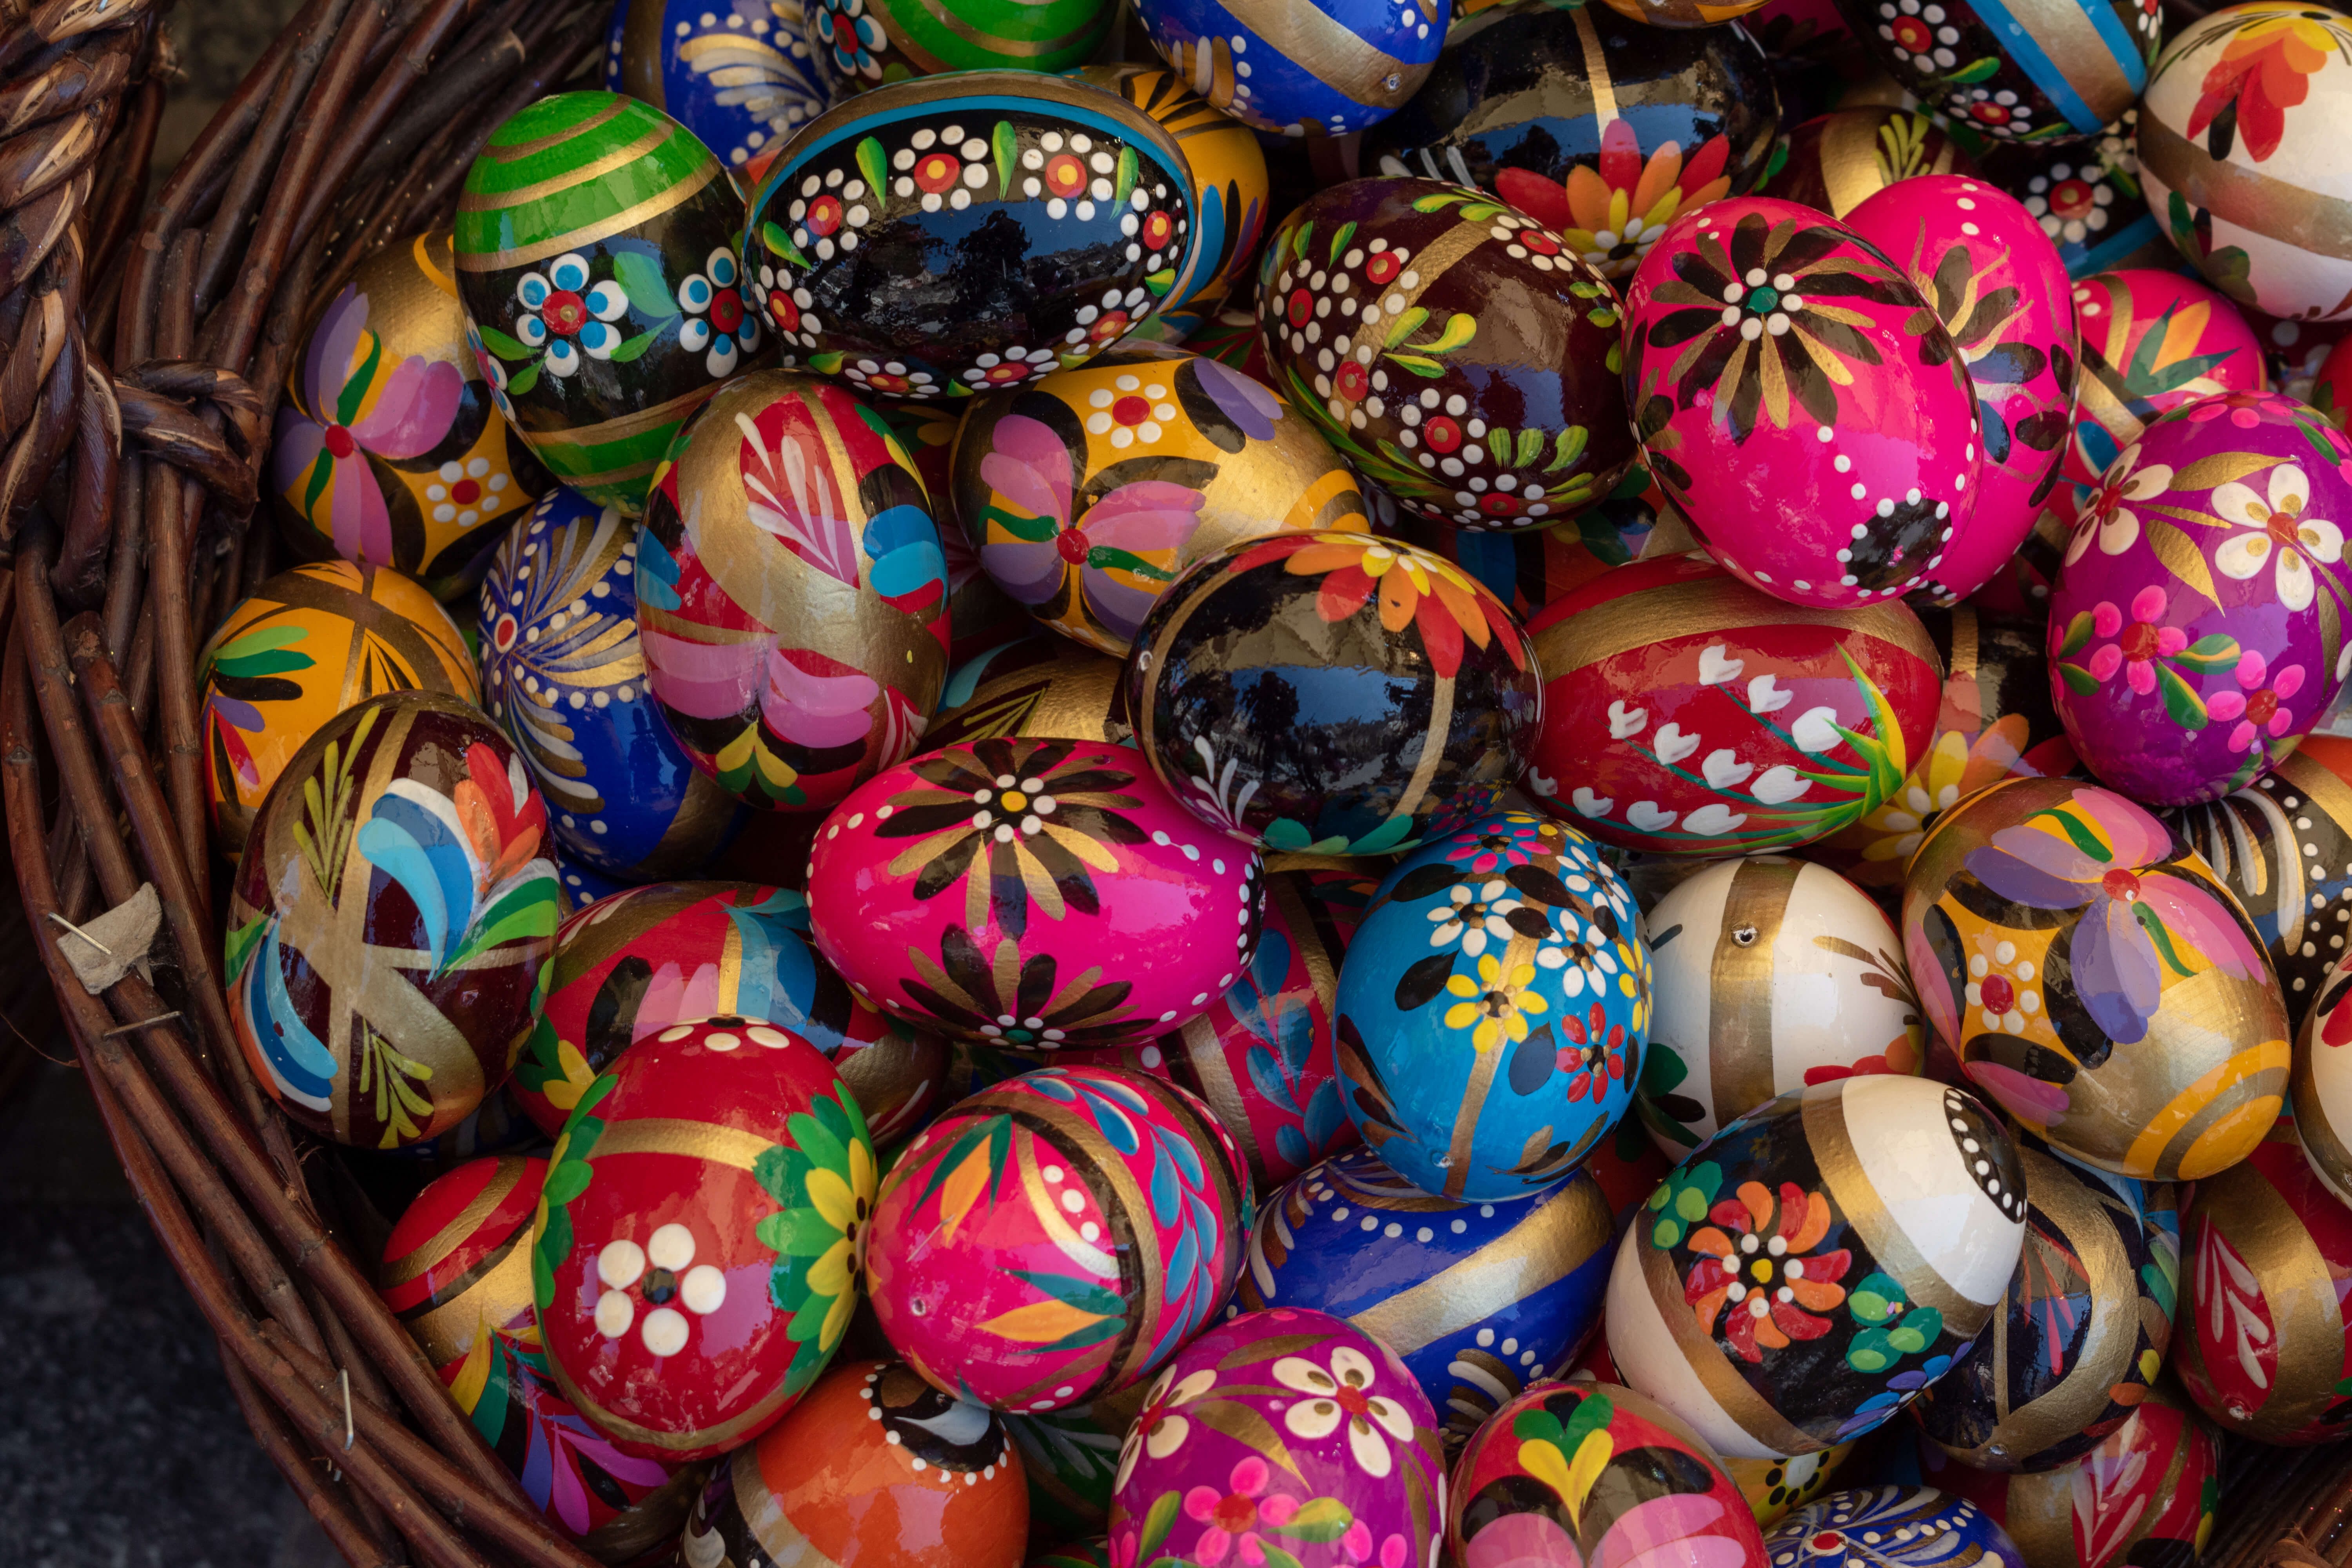 Hand-painted wooden eggs